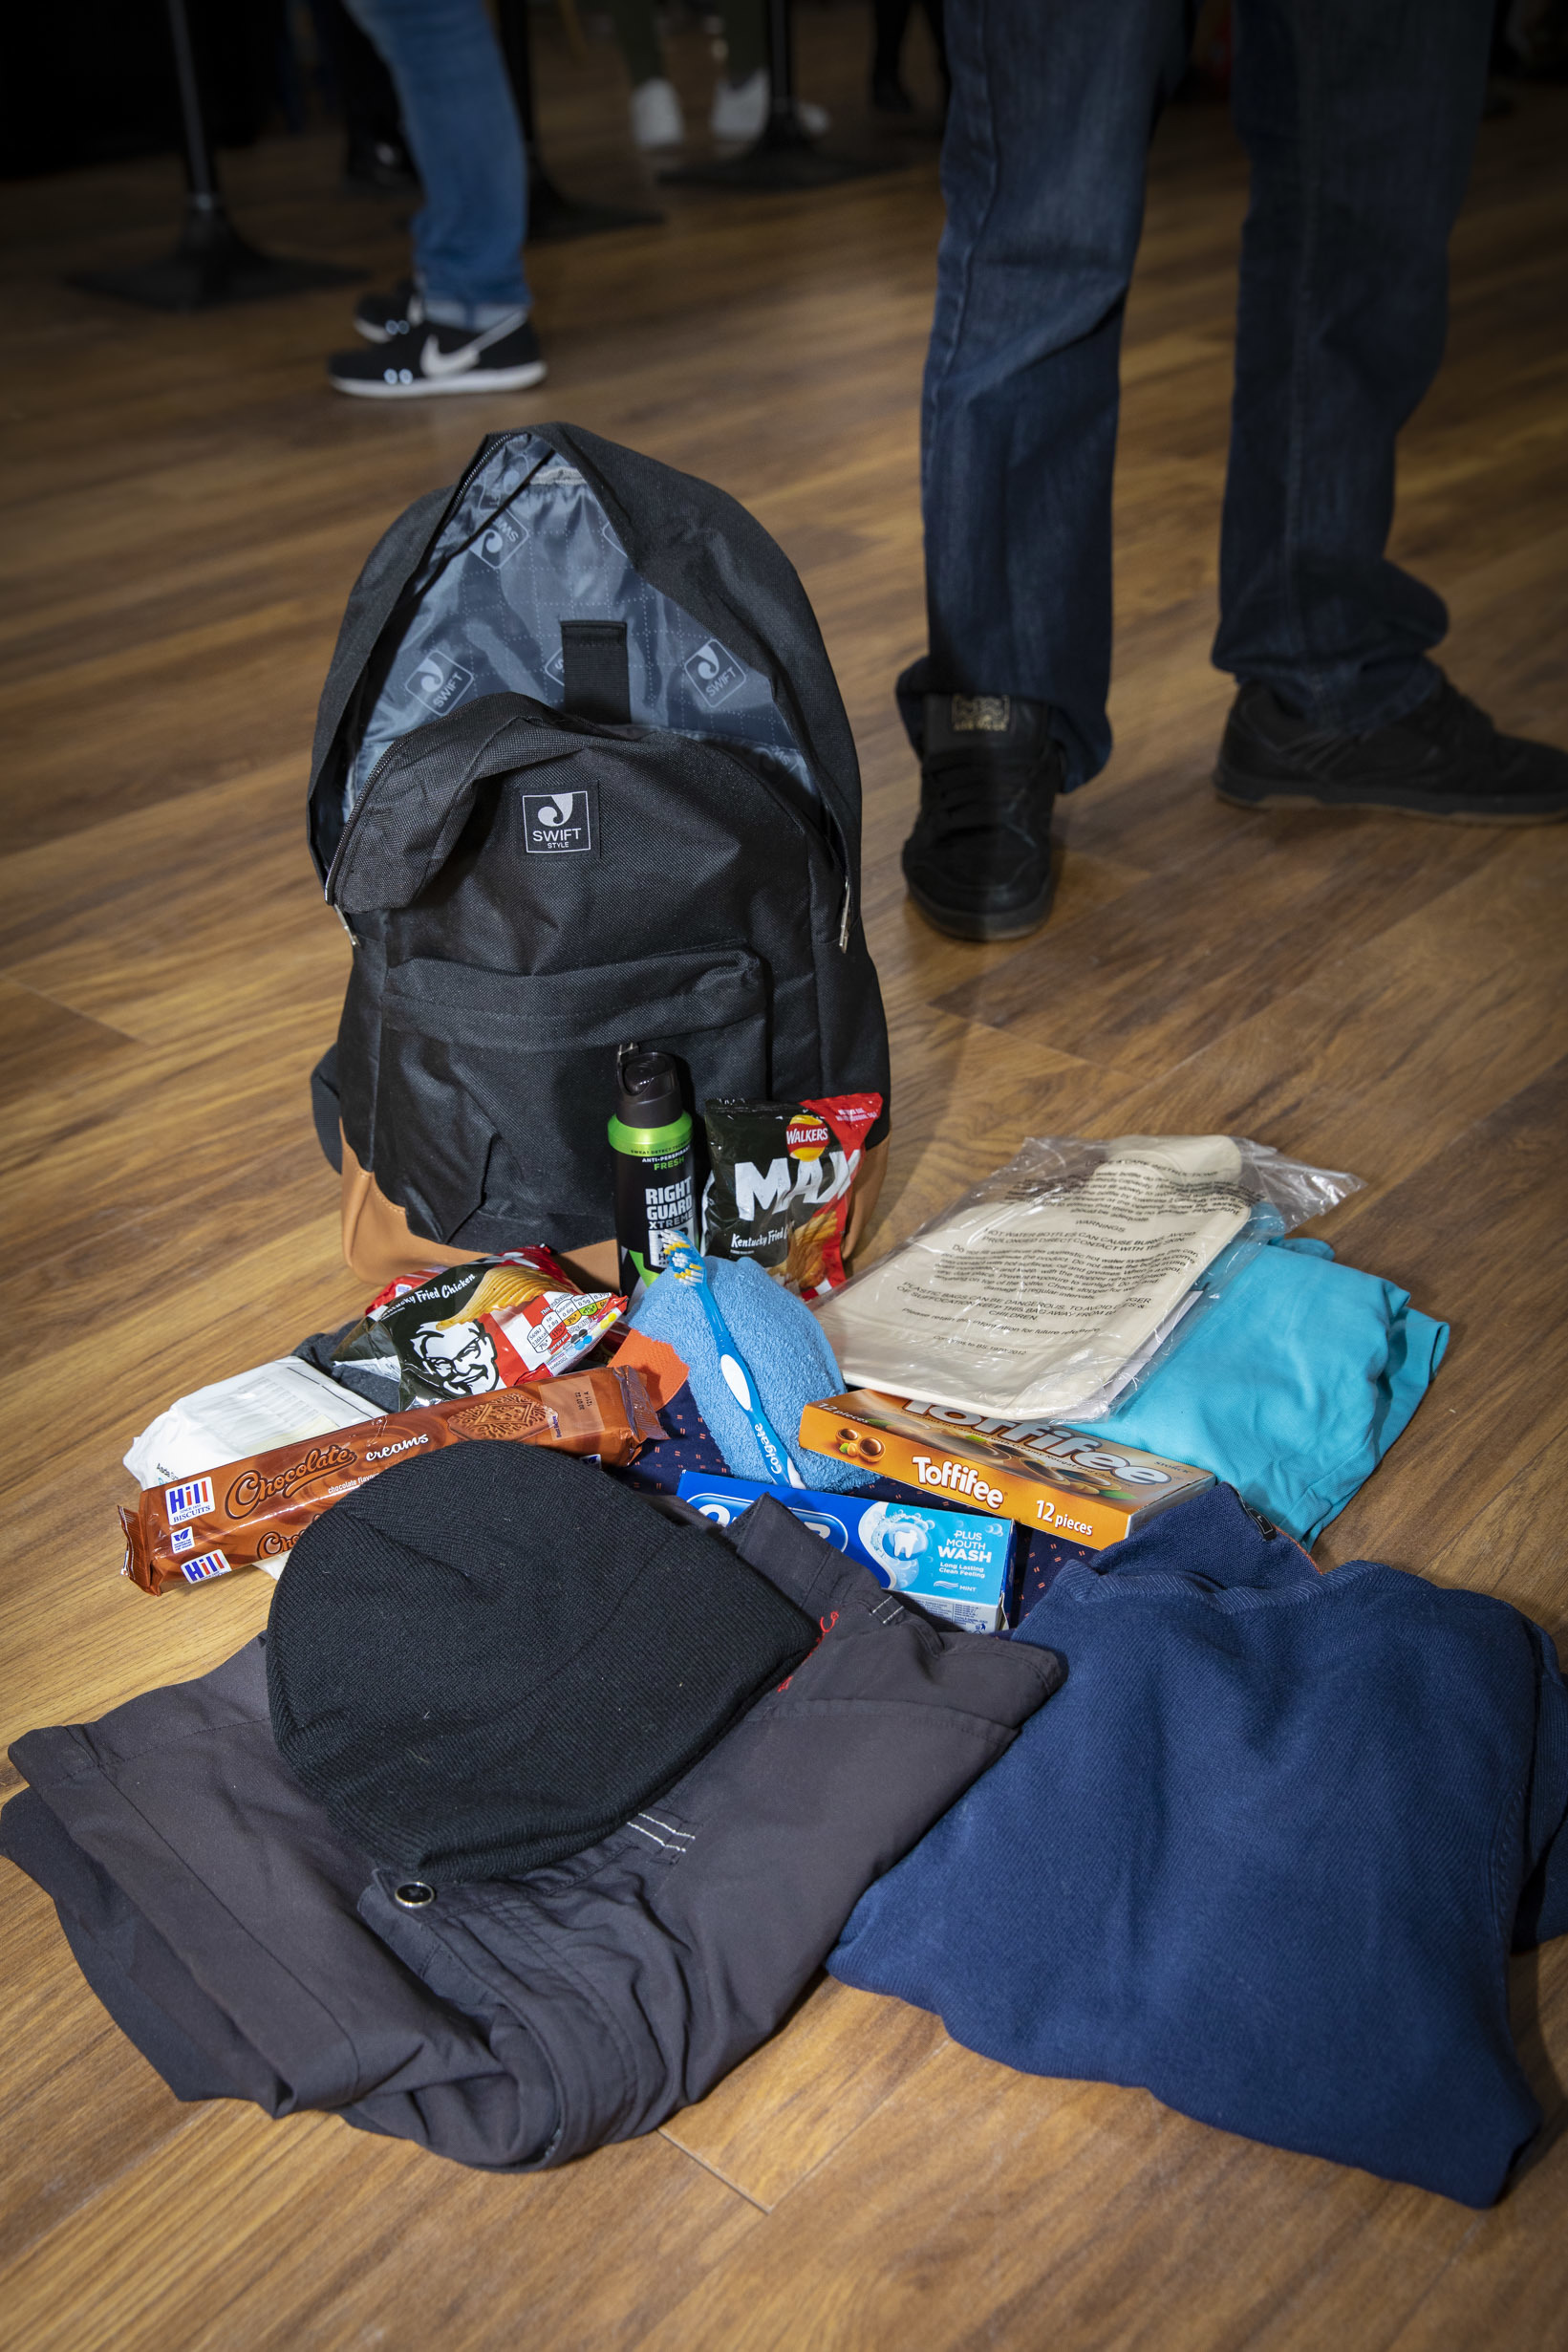 Hadlow Edwards donation to help homeless people. One of the ruck sacks containing vital items given out to homeless. Picture Mandy Jones